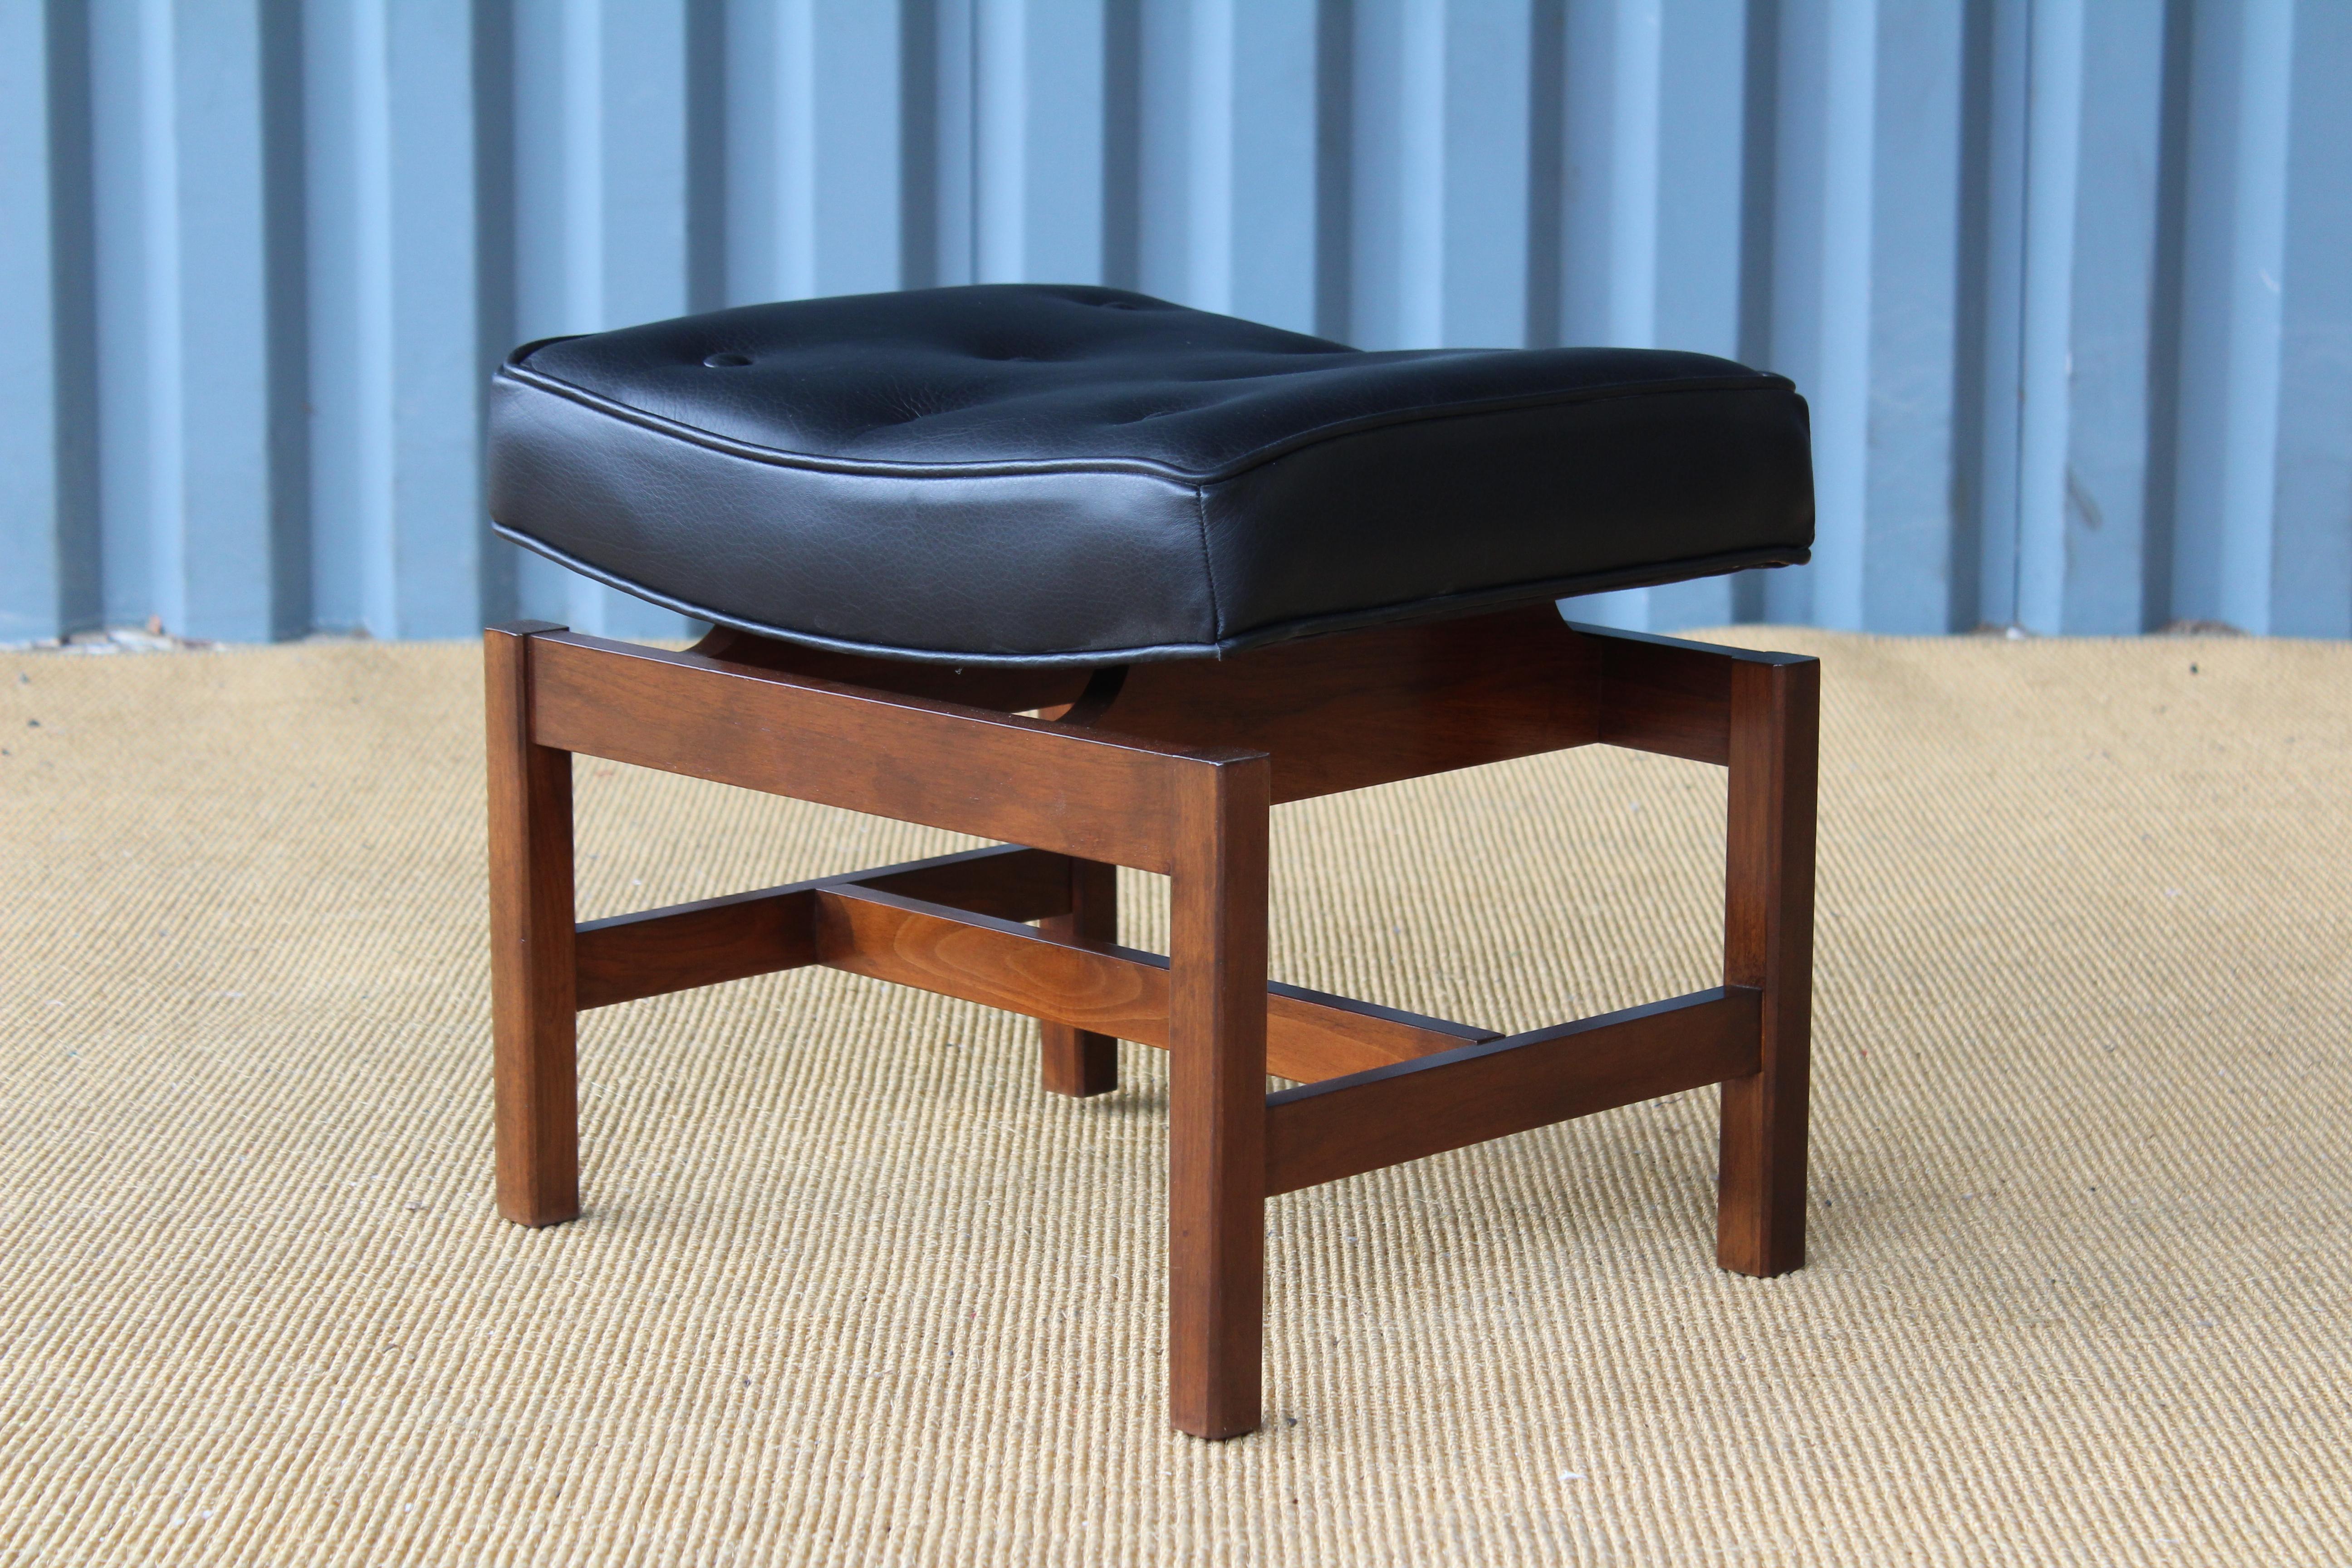 Jens Risom 'Floating' stool. Walnut base has been refinished. New tufted leather seat.